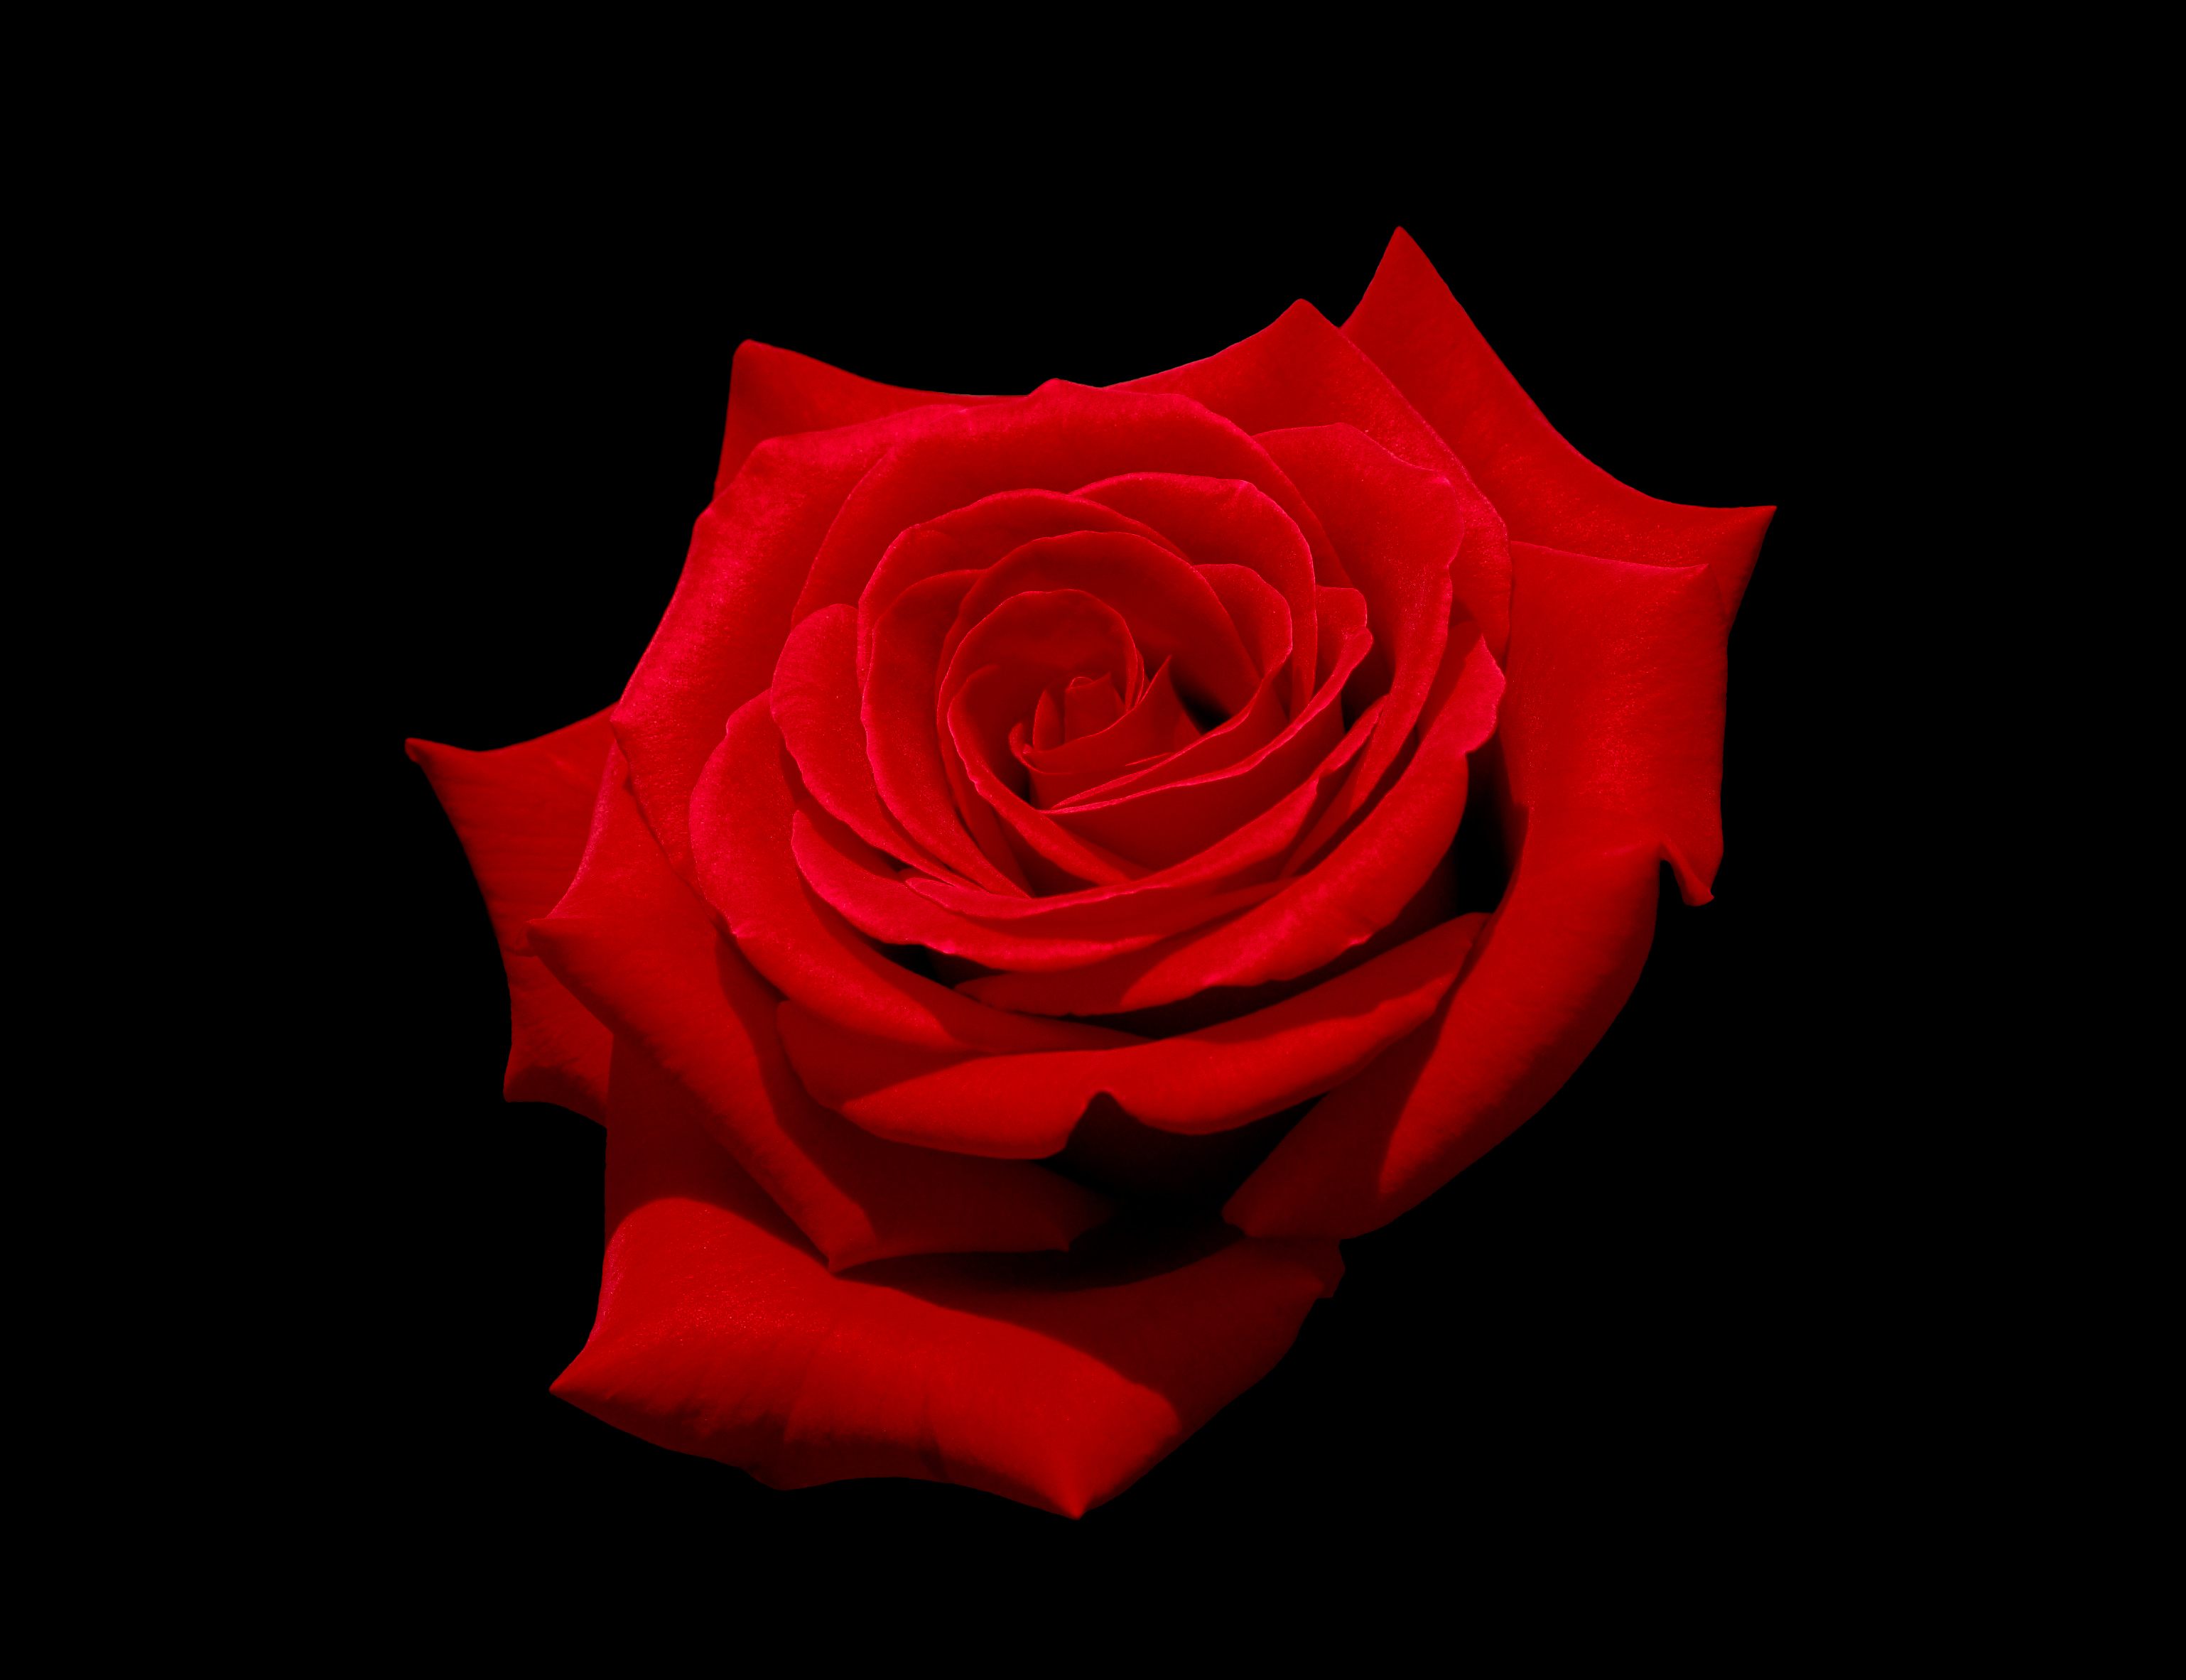 Gallery For gt Red Roses With Black Background